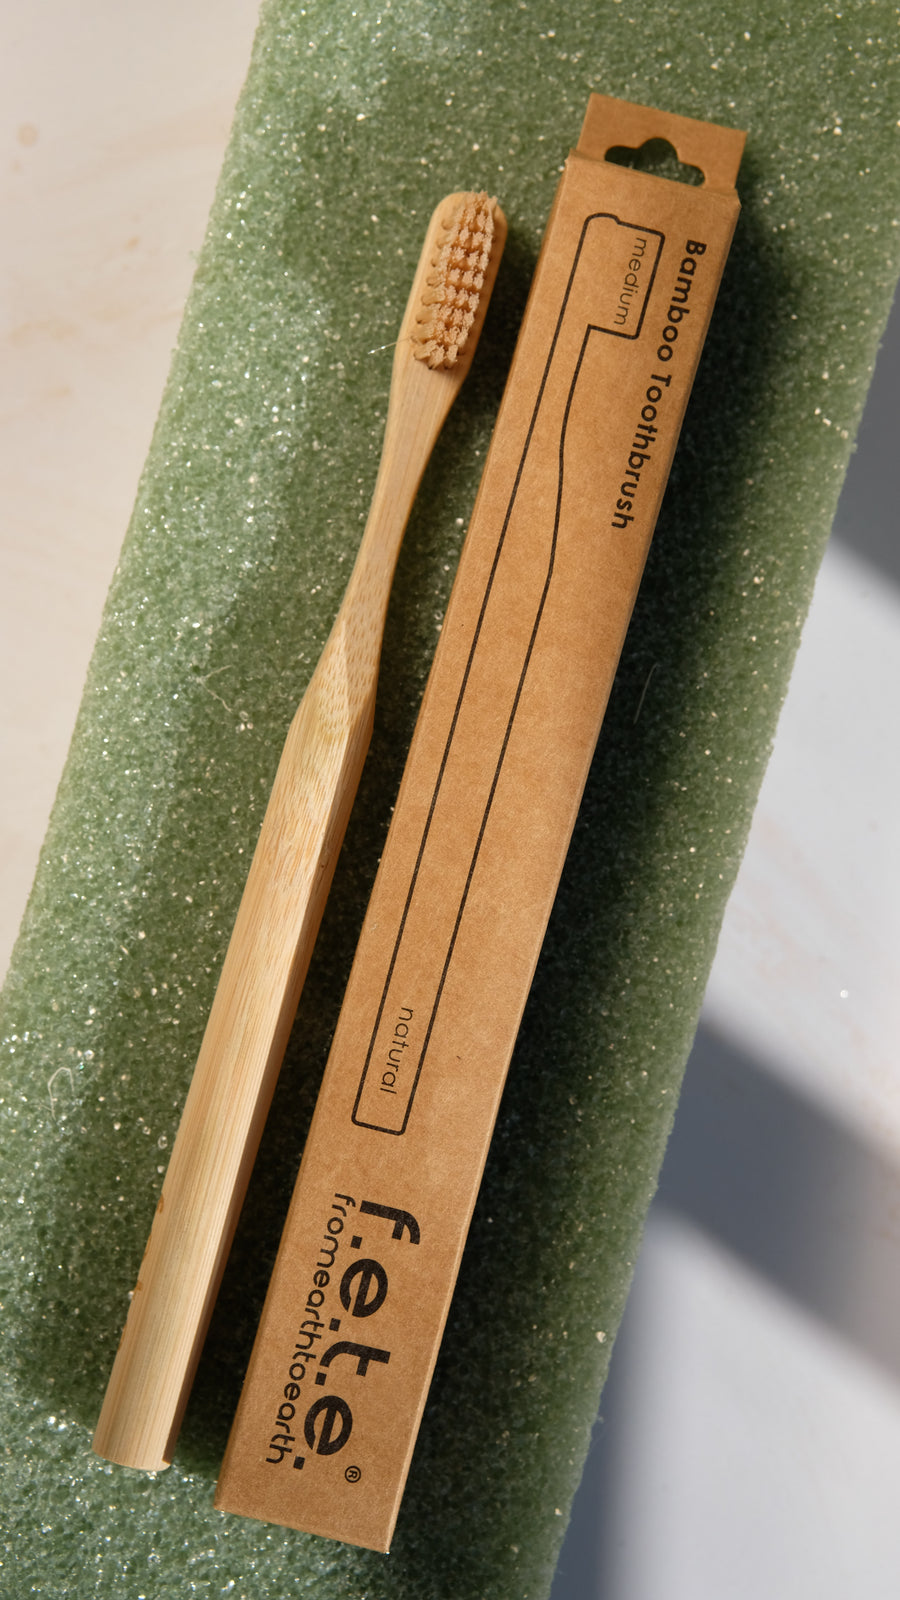 F.E.T.E. Medium Bamboo Toothbrush in Natural